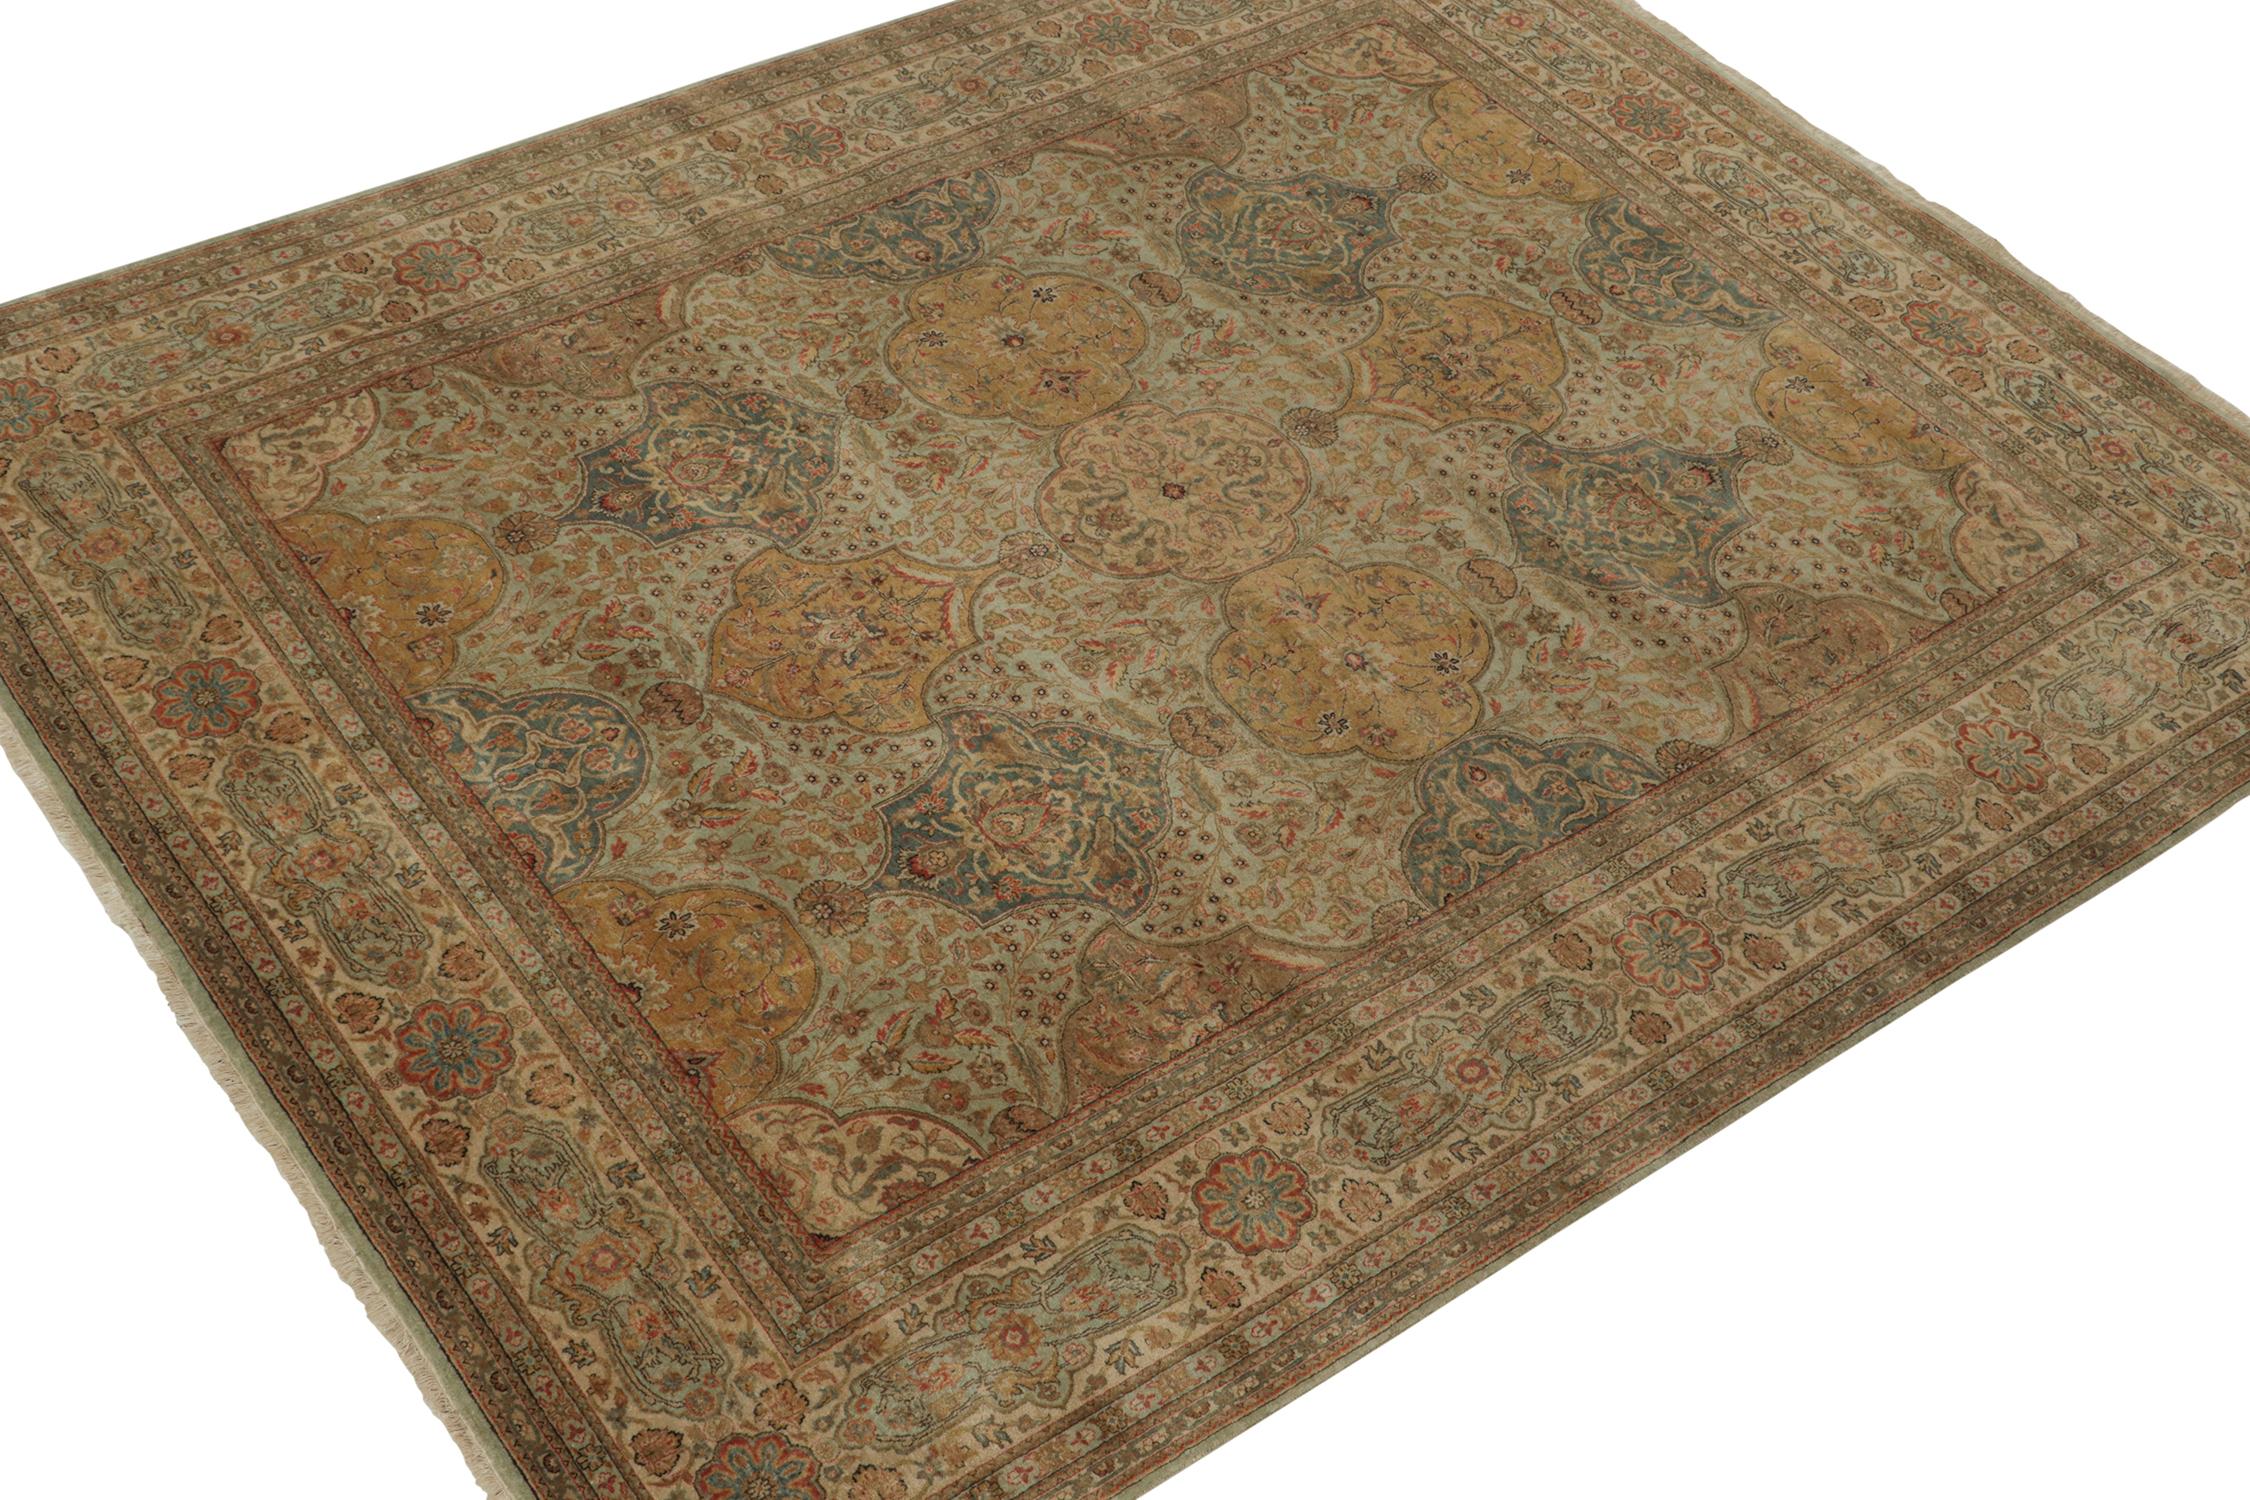 Indian Rug & Kilim’s Classic style rug with Gold, Beige and Green Floral patterns For Sale